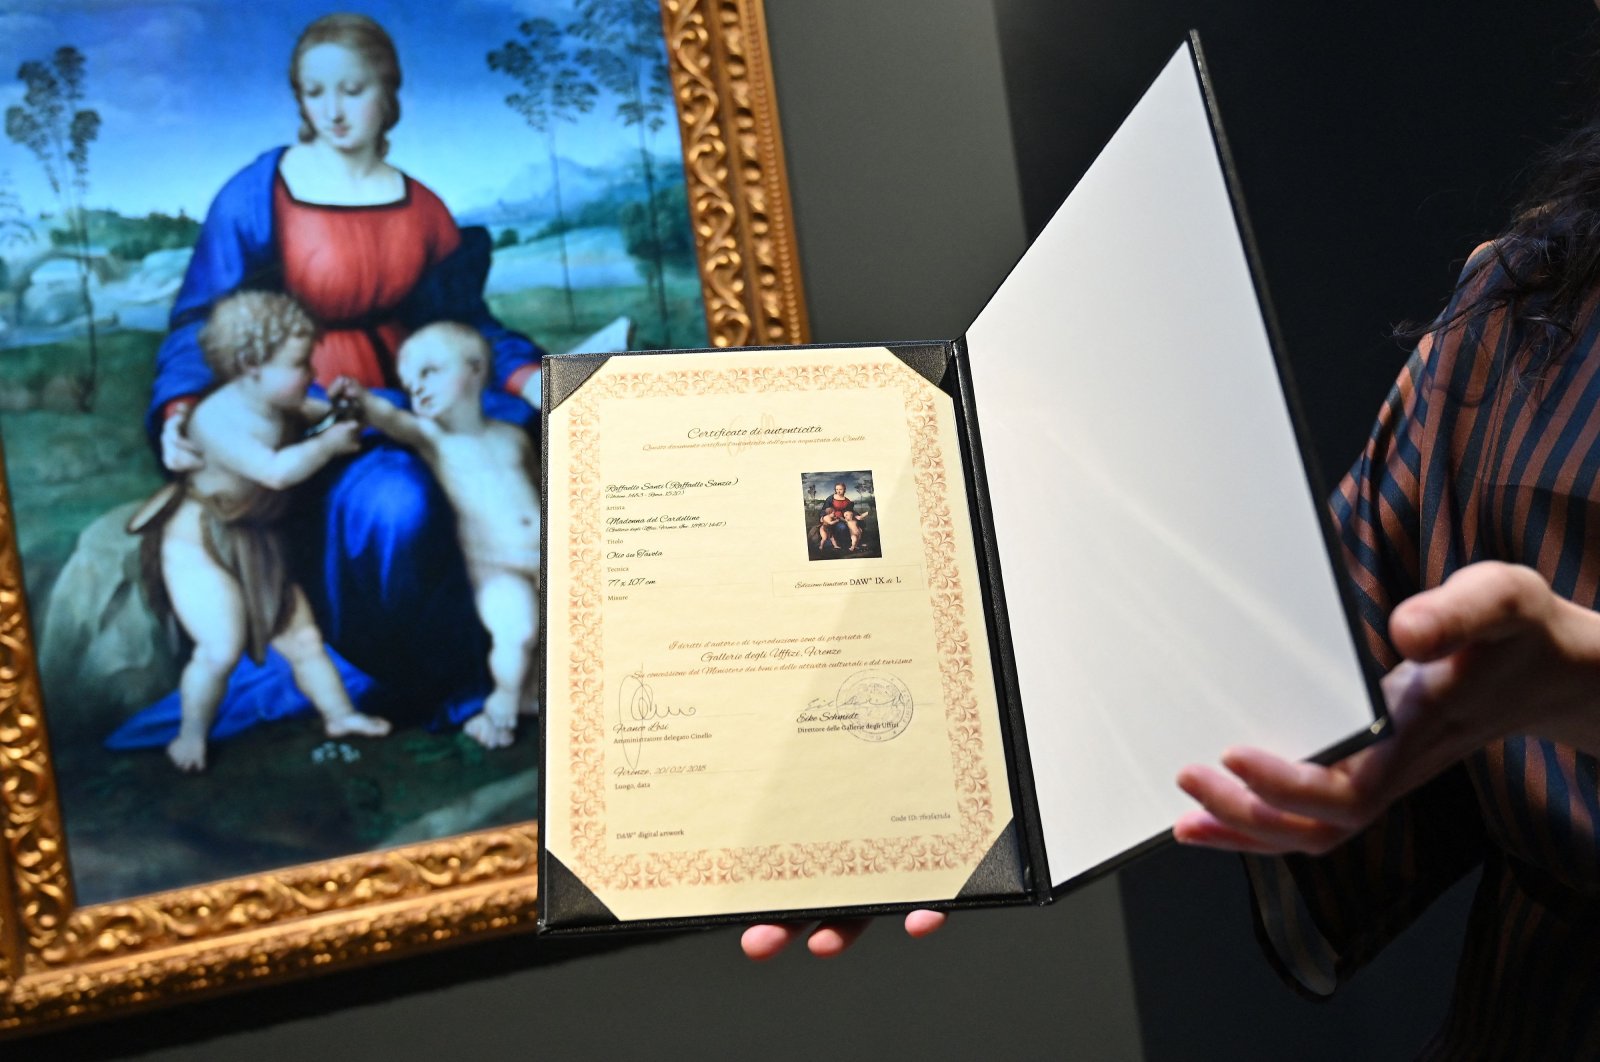 In this file photograph taken on Feb. 15, 2022, a gallery assistant looks at a digital reproduction of the painting &quot;Madonna del Cardellino&quot; (&quot;Madonna of the Goldfinch&quot;) by Raphael, displayed as part of the &quot;Eternalizing Art History: From Da Vinci to Modigliani&quot; exhibition at the Unit London gallery in London, where so-called &quot;NFT&quot; (non-fungible token) digital reproductions of six Italian masterpieces, including paintings by Leonardo da Vinci and Amedeo Modigliani, are on display in London. (AFP Photo)